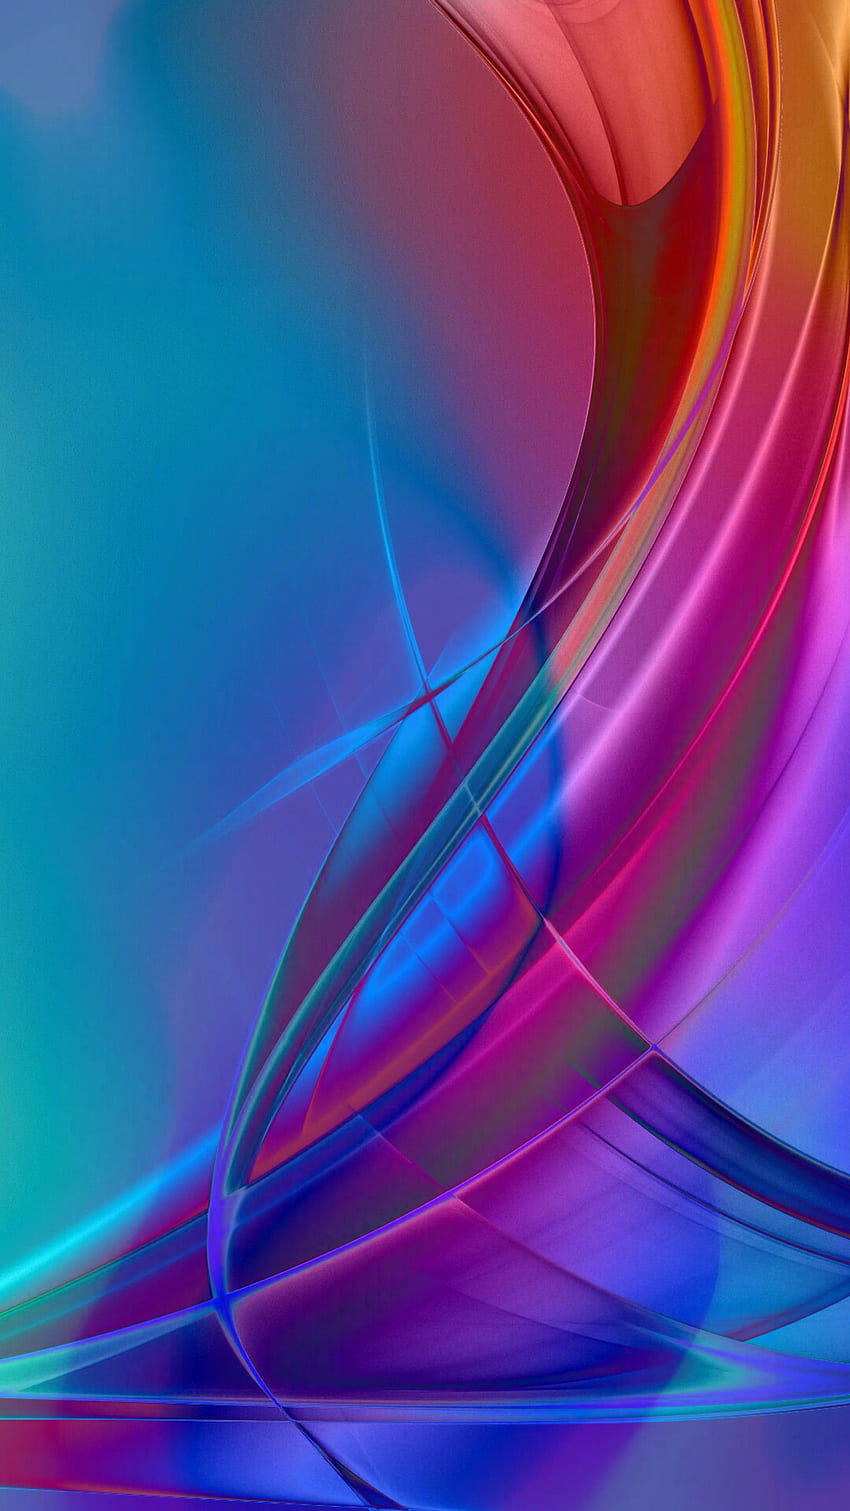 huawei , blue, purple, graphic design, colorfulness, violet - Use, Huawei P8 HD phone wallpaper